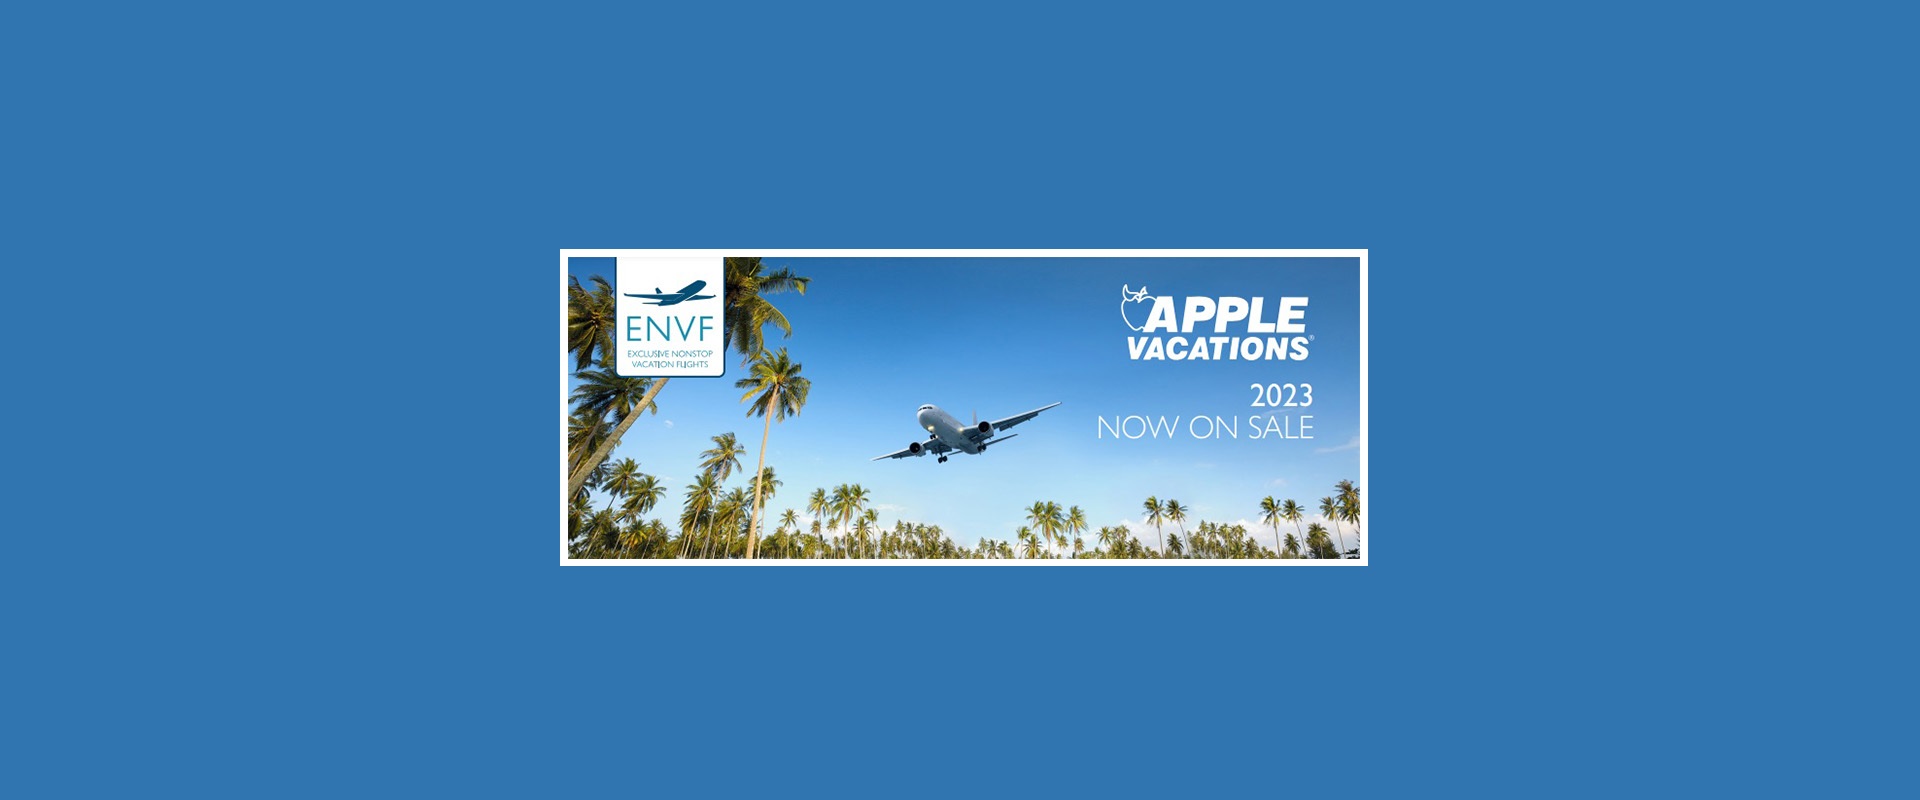 Apple Vacations Apple Vacation Travel Agent Travel By Bob